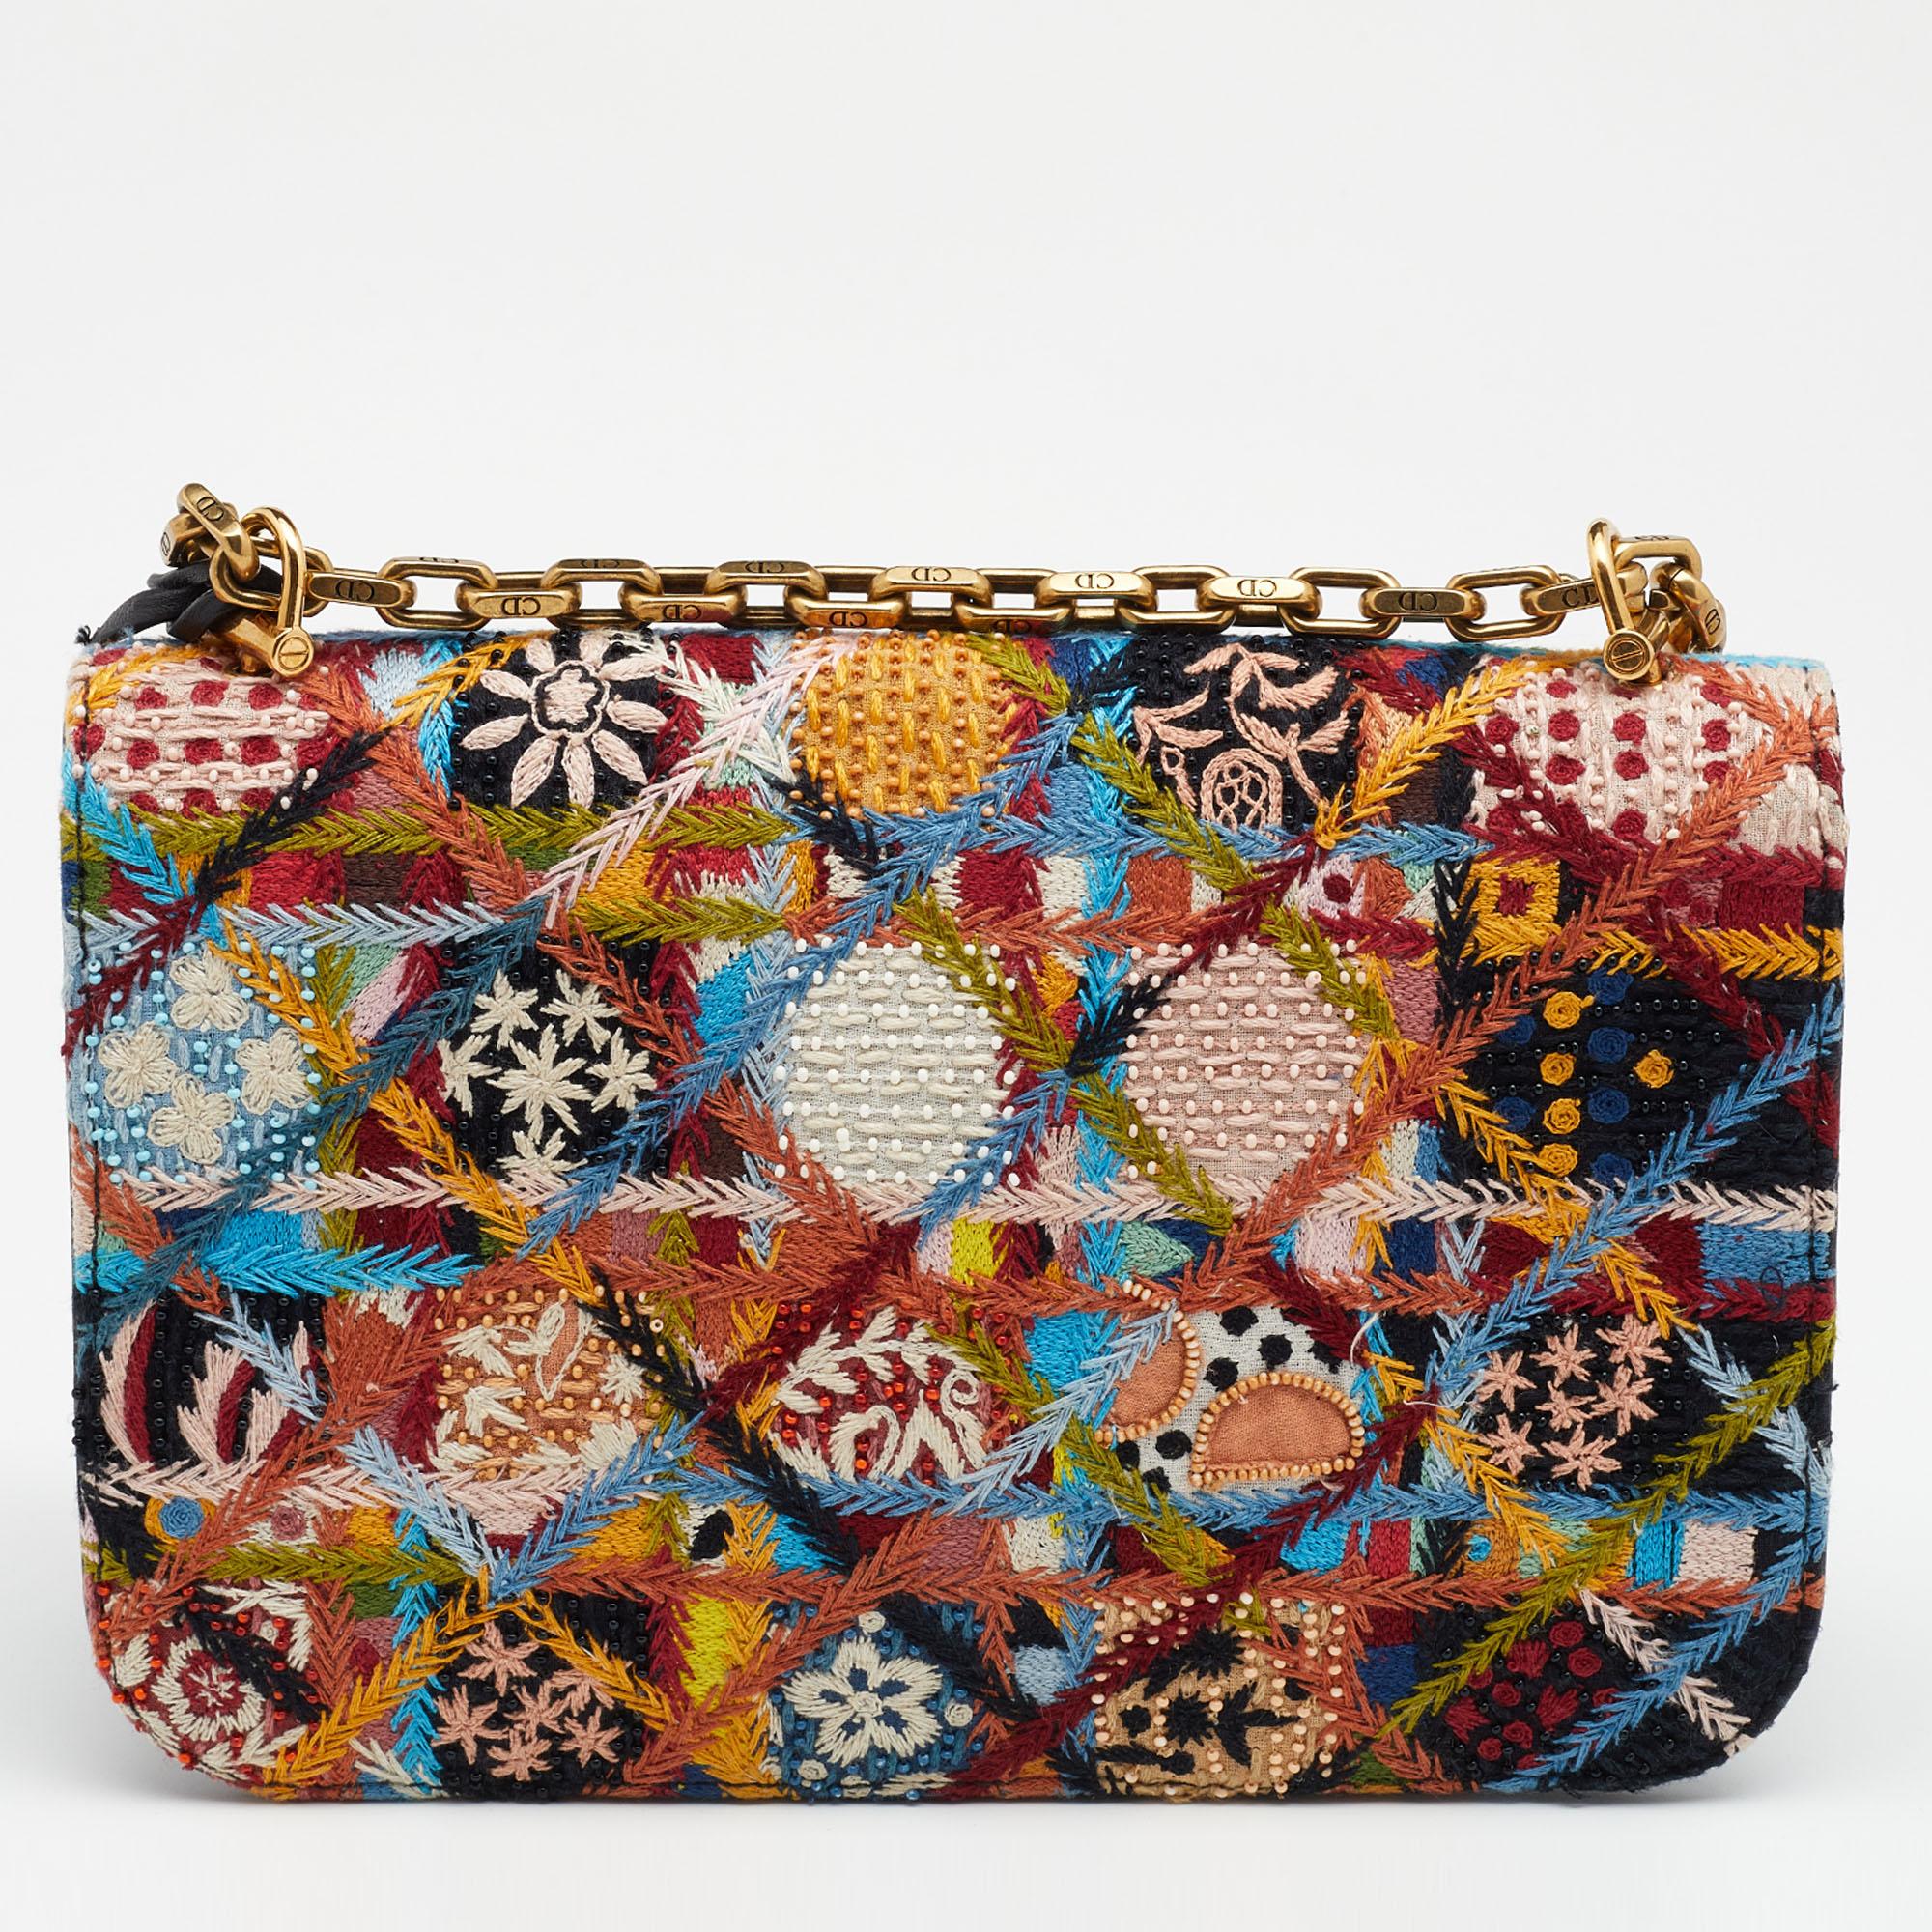 Dior created this Dioraddict bag to spark joy and give you a smile each time you take it out of your closet to complement or save an outfit. It's a super special piece made of intricately embroidered fabric bursting in pleasing colors. The bag is